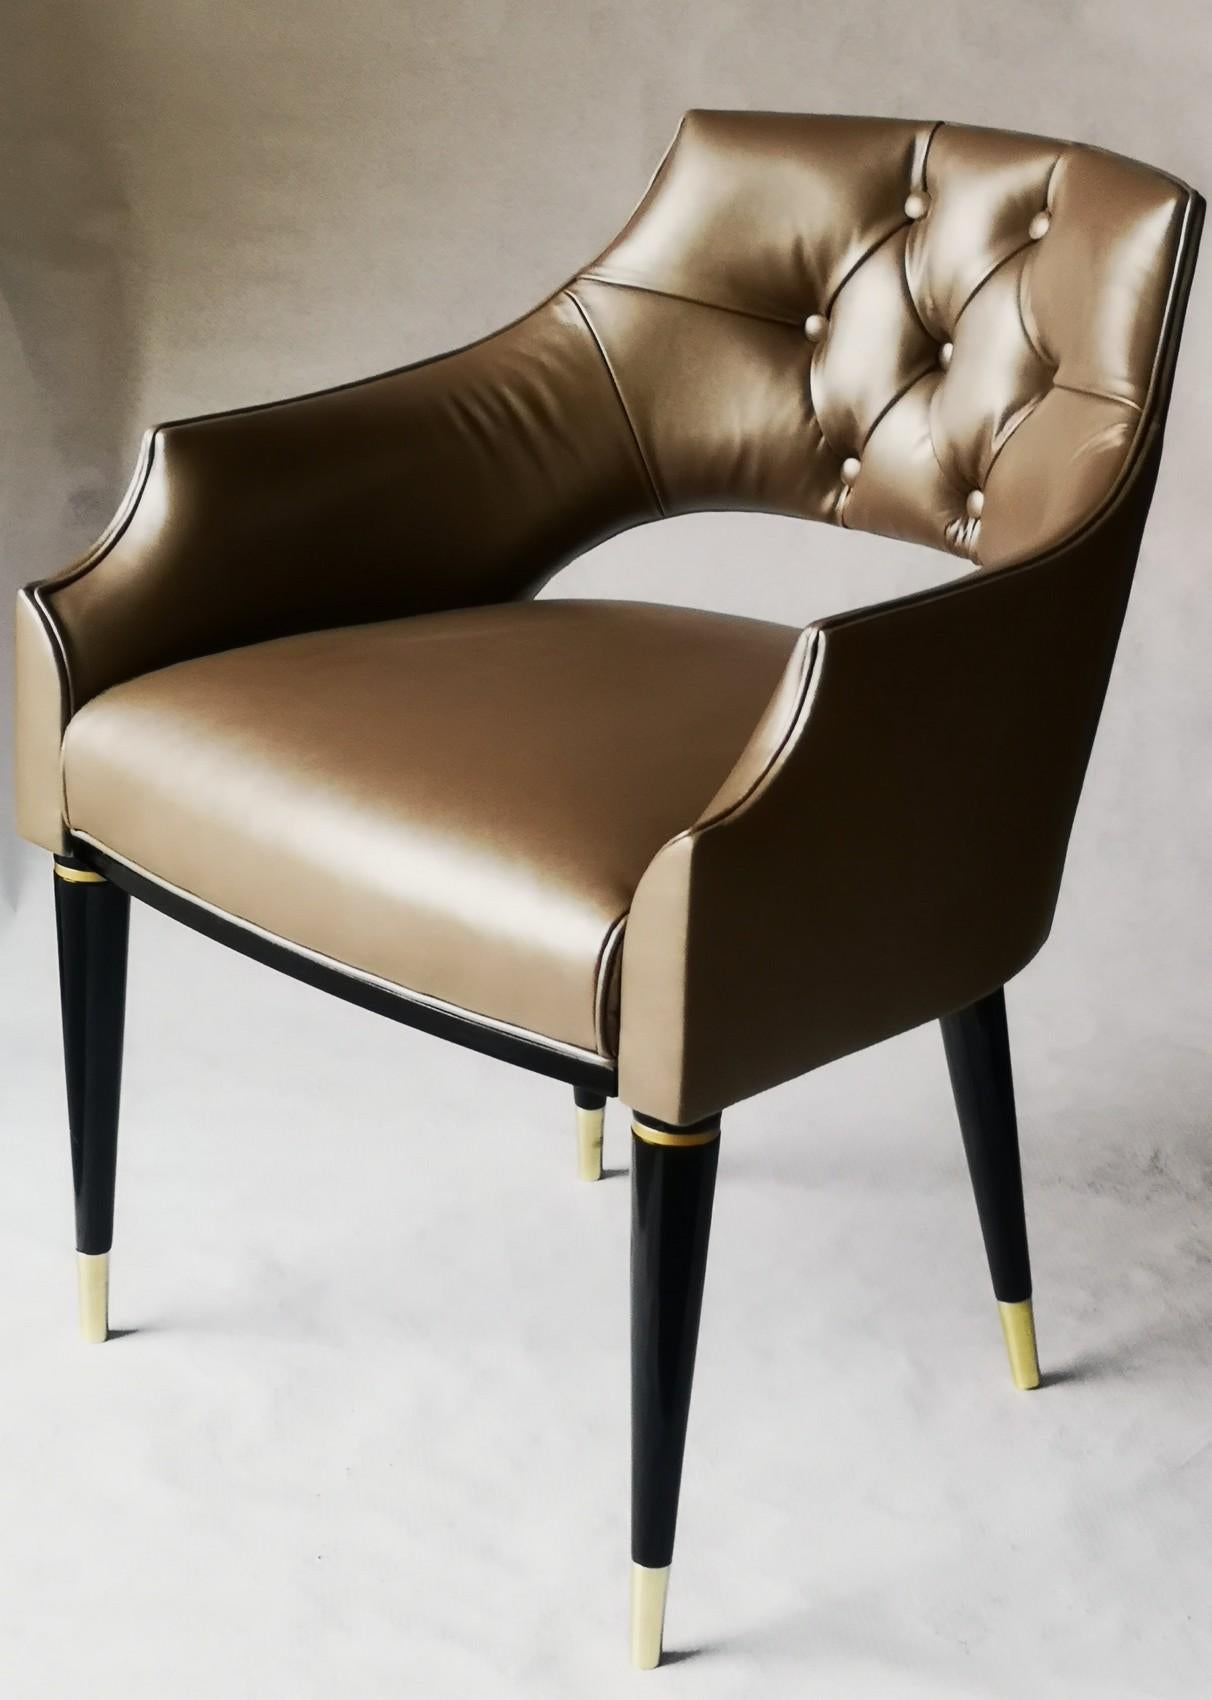 Polished Dining Armchair, Tufted Fiore Italian Leather, Midcentury Style, Luxury Details